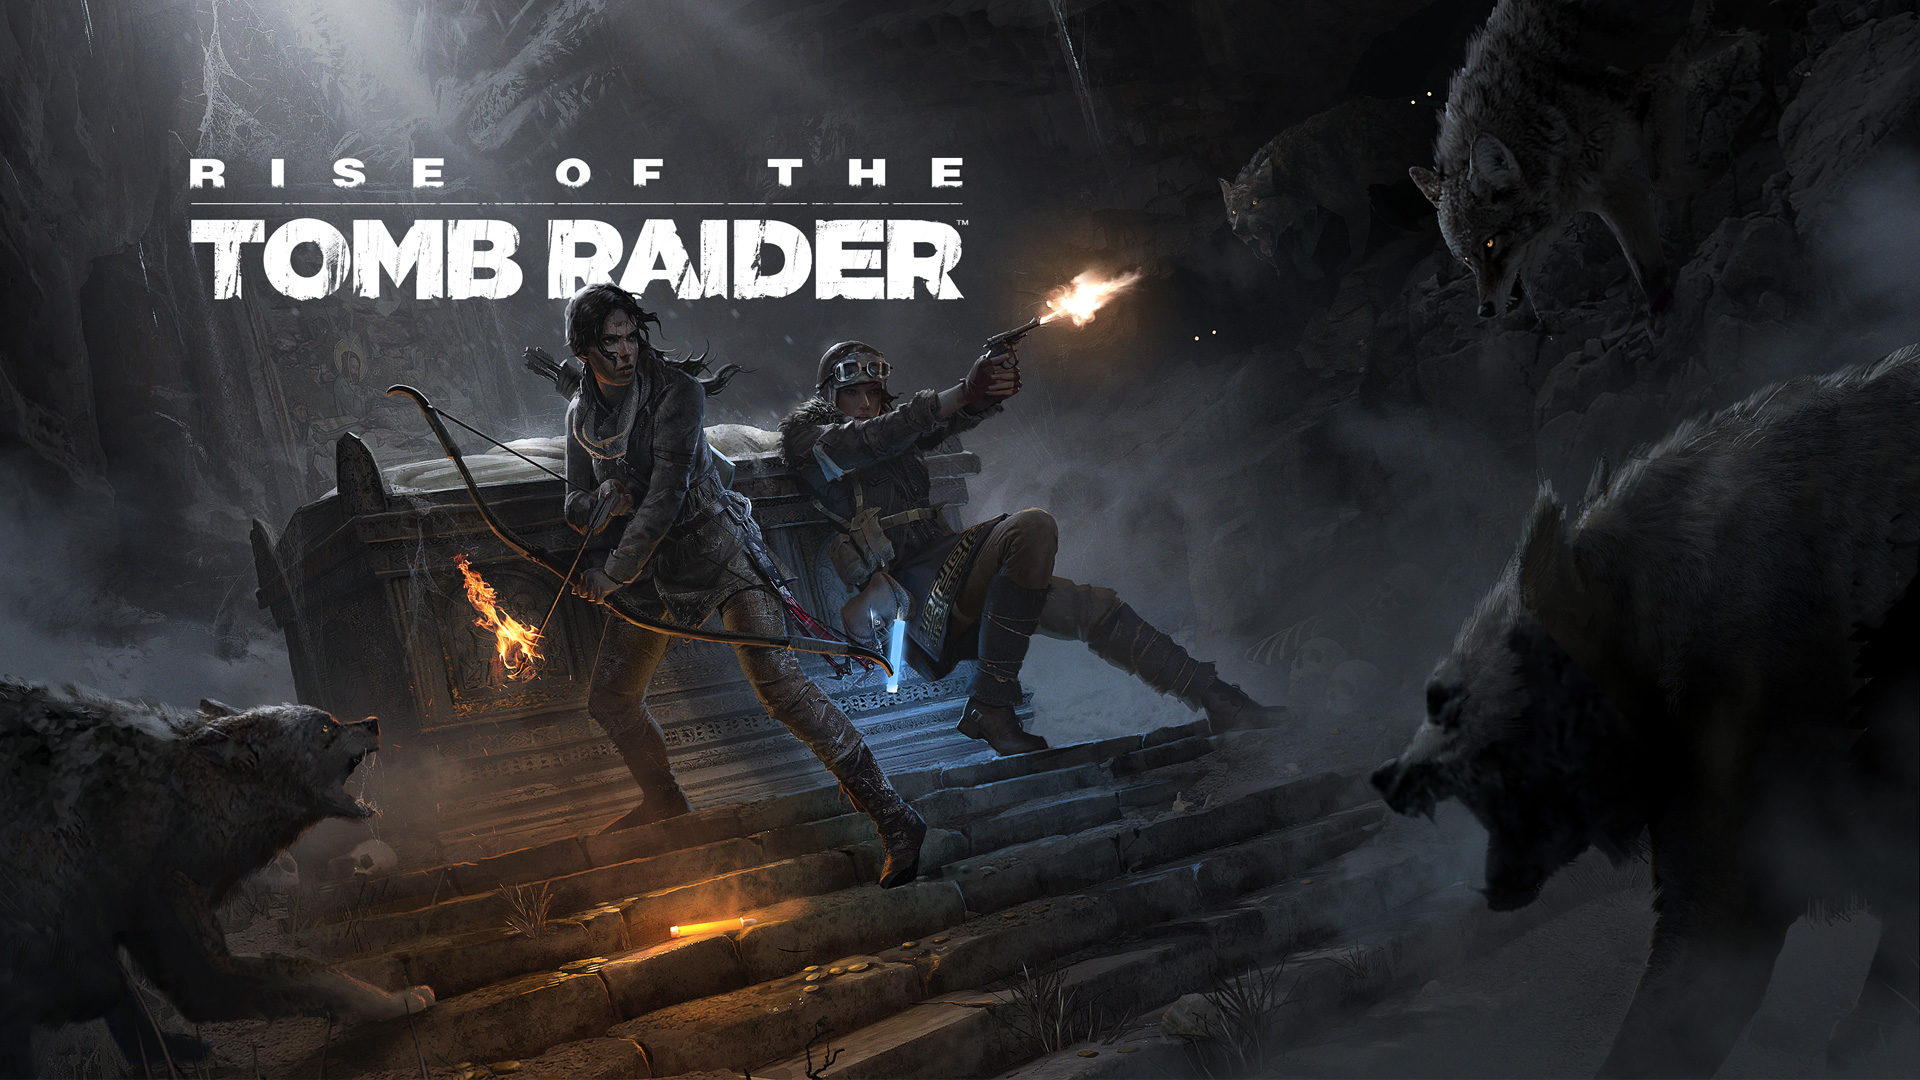 Watch the Rise of the Tomb Raider: 20 Year Celebration “Blood Ties” Trailer